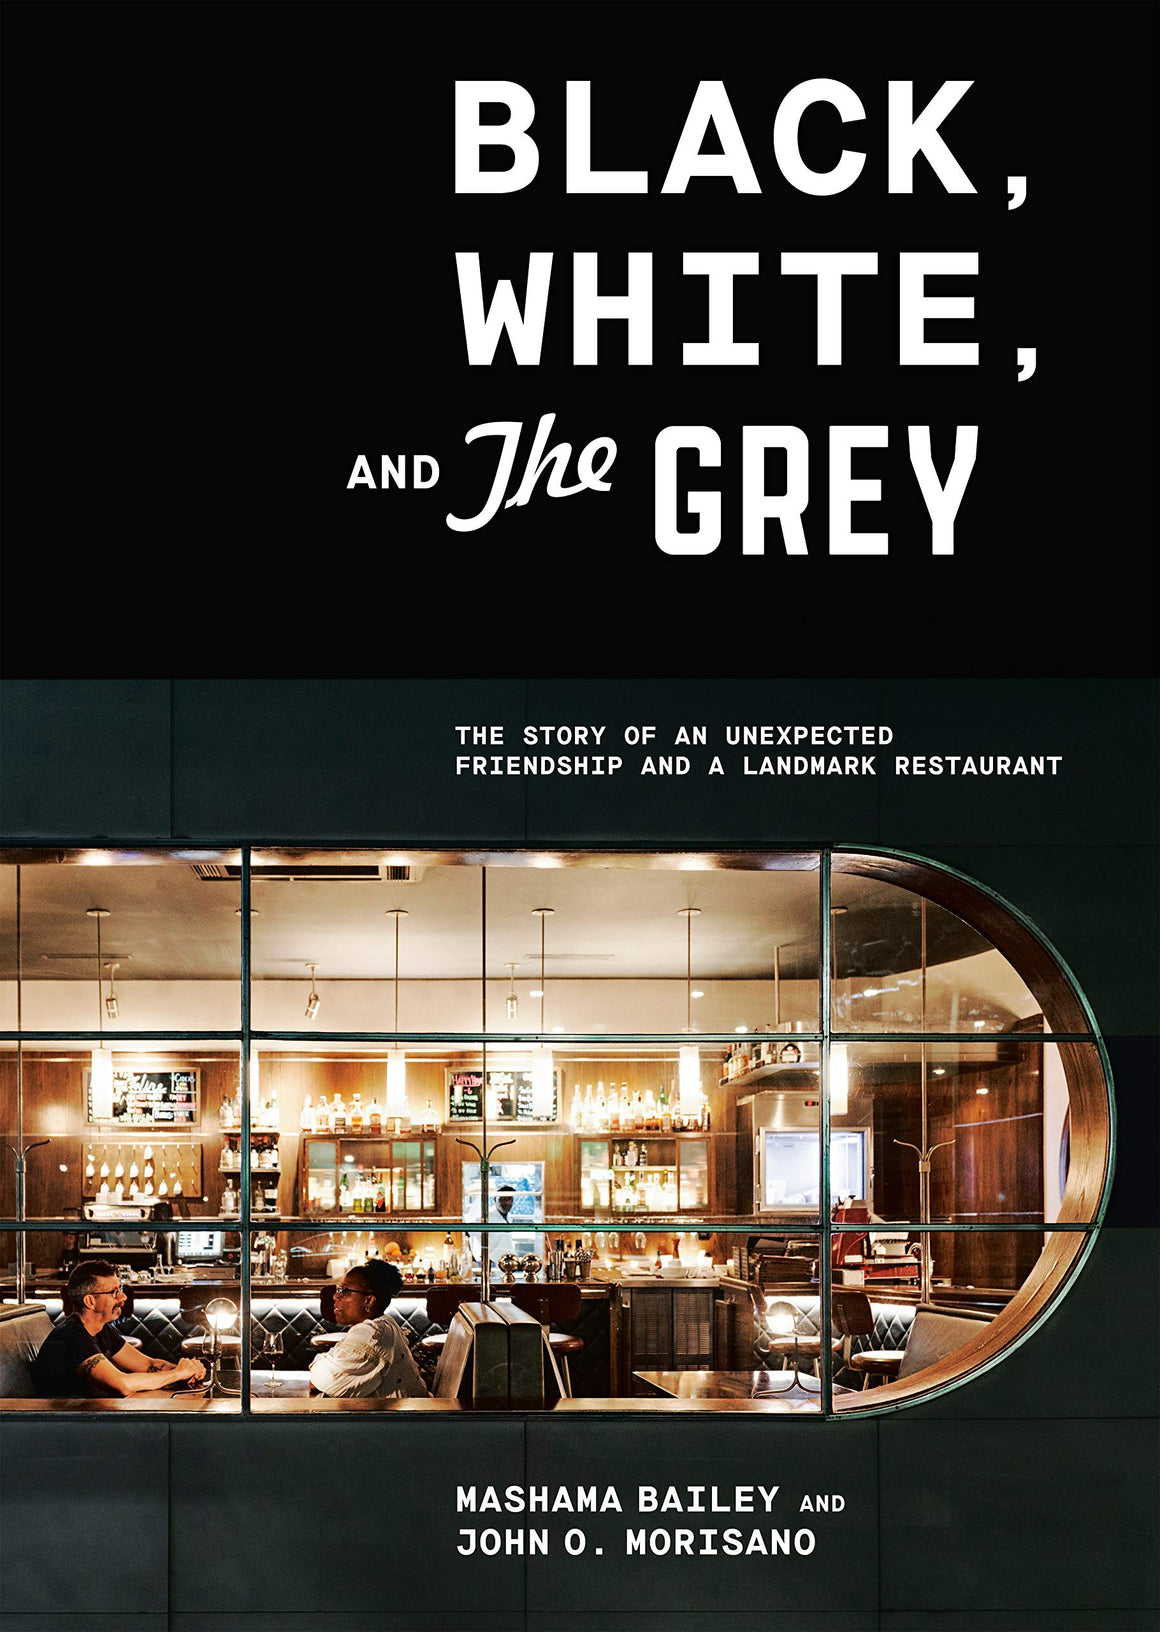 (Food Writing) Mashama Bailey and John O. Morisano. Black, White, and The Grey: The Story of an Unexpected Friendship and a Beloved Restaurant. SIGNED!